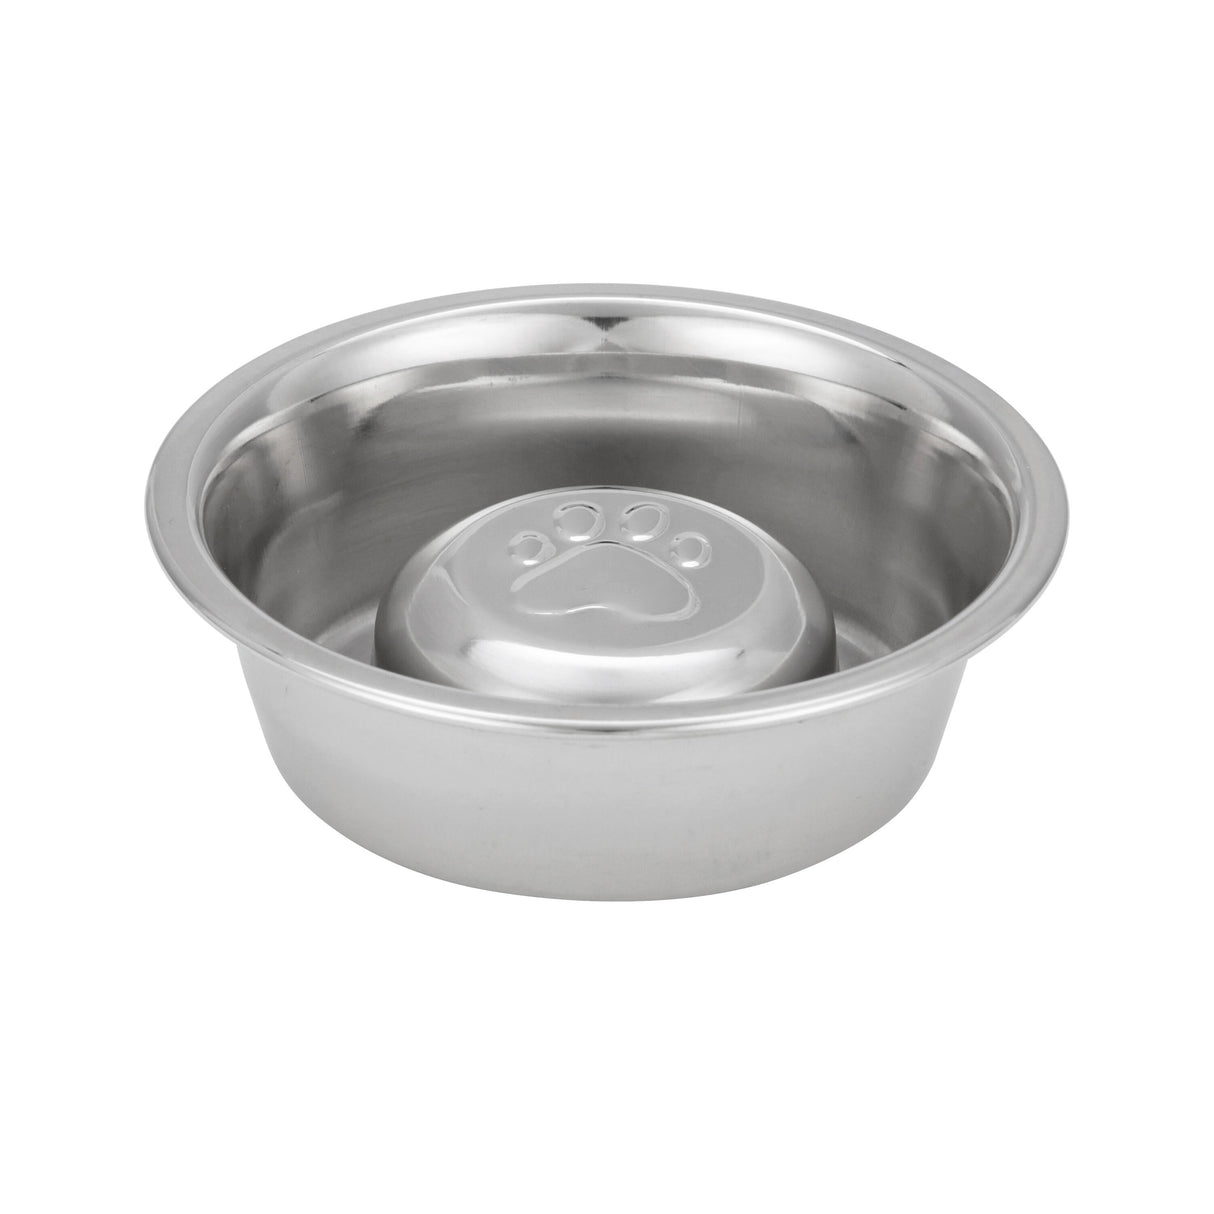 Stainless Steel Dog Bowl Replacements Basic Bowls for Large Dogs